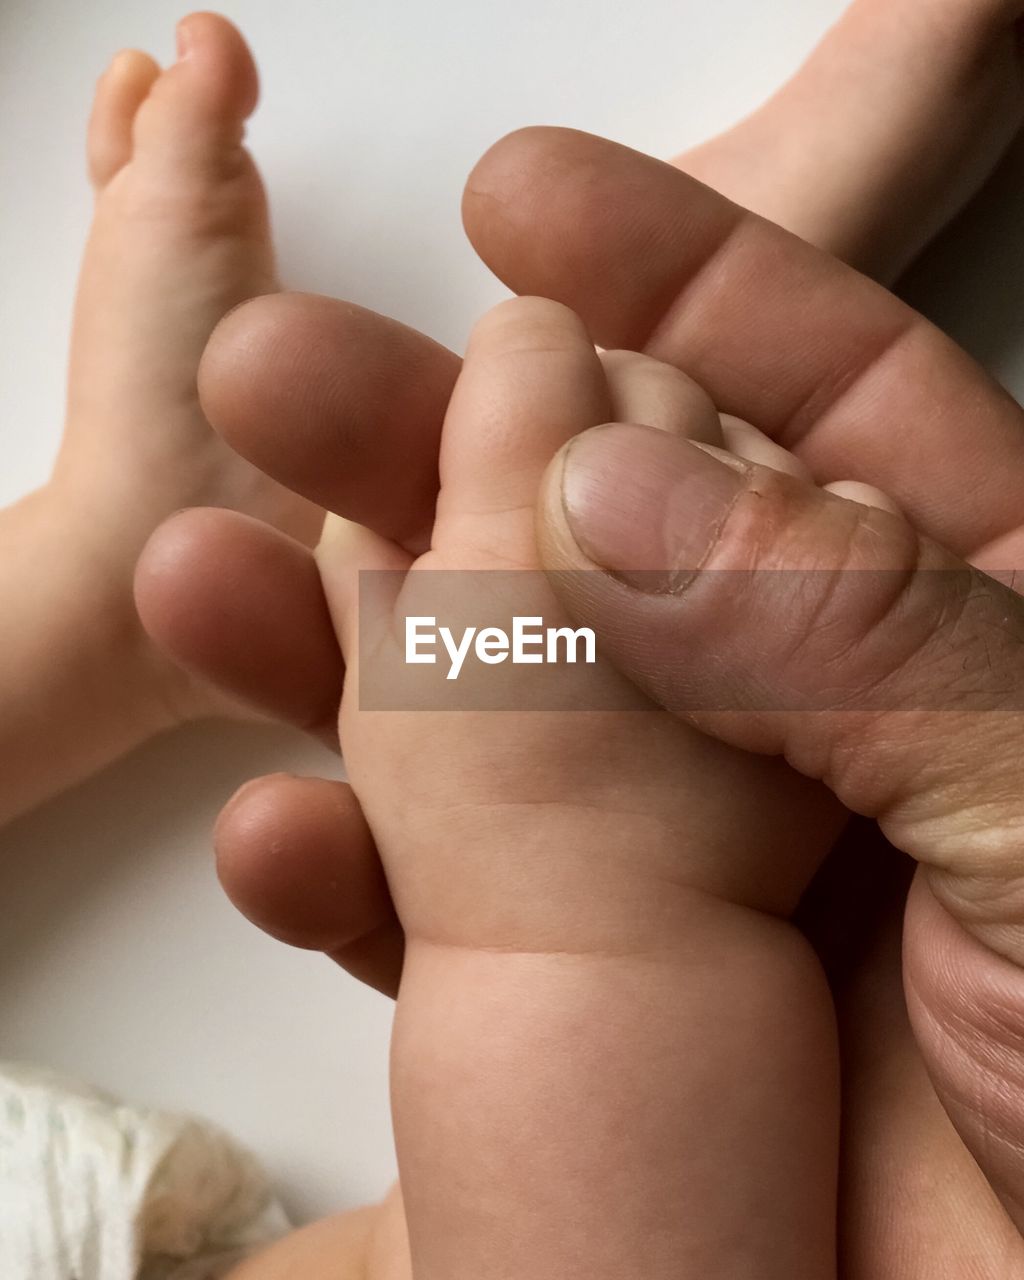 Baby holding his grandfather finger, close-up